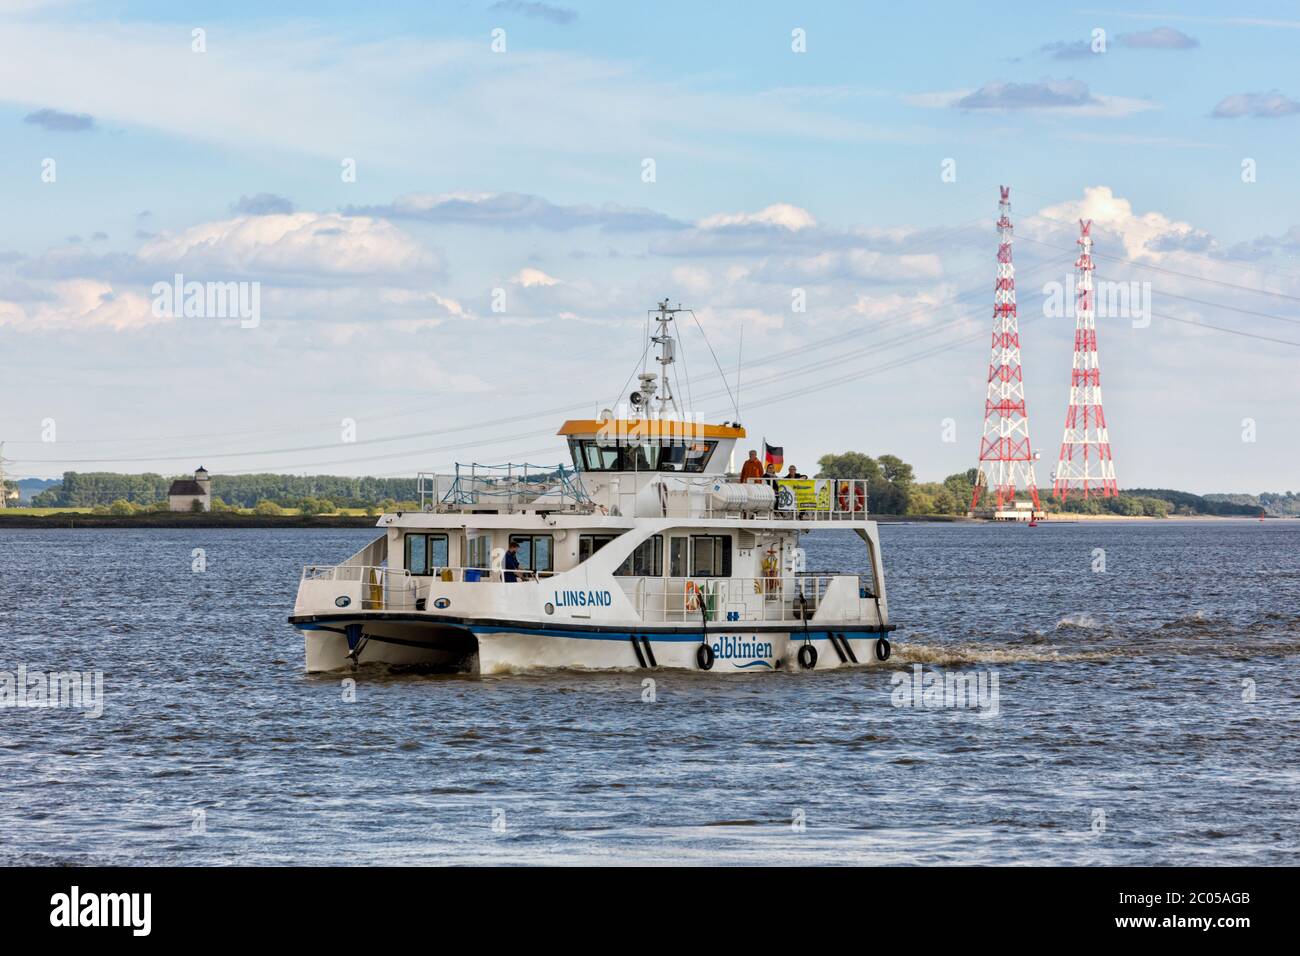 Catamaran ferry boat LIINSAND on Elbe river approaching Stade Stock Photo